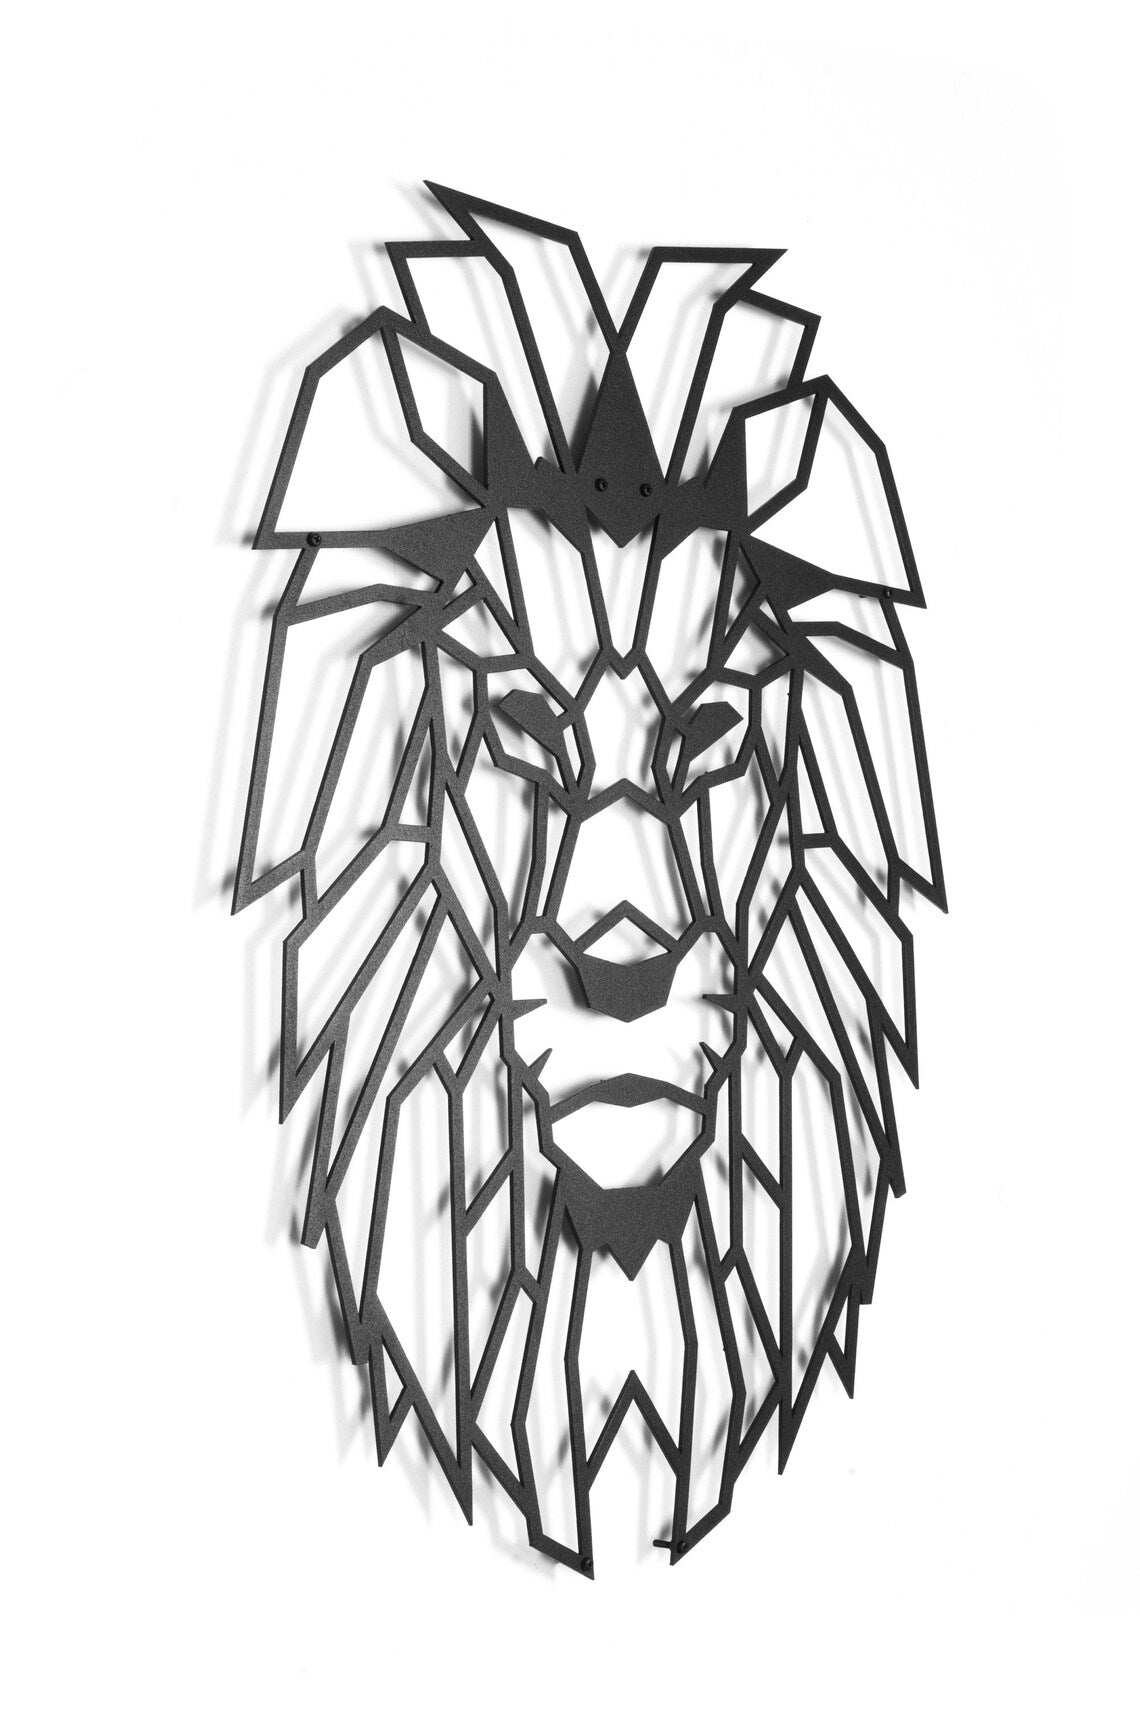 Metal wall art lion head. Geometric design shows off the proud nature of the lion in all its glory.